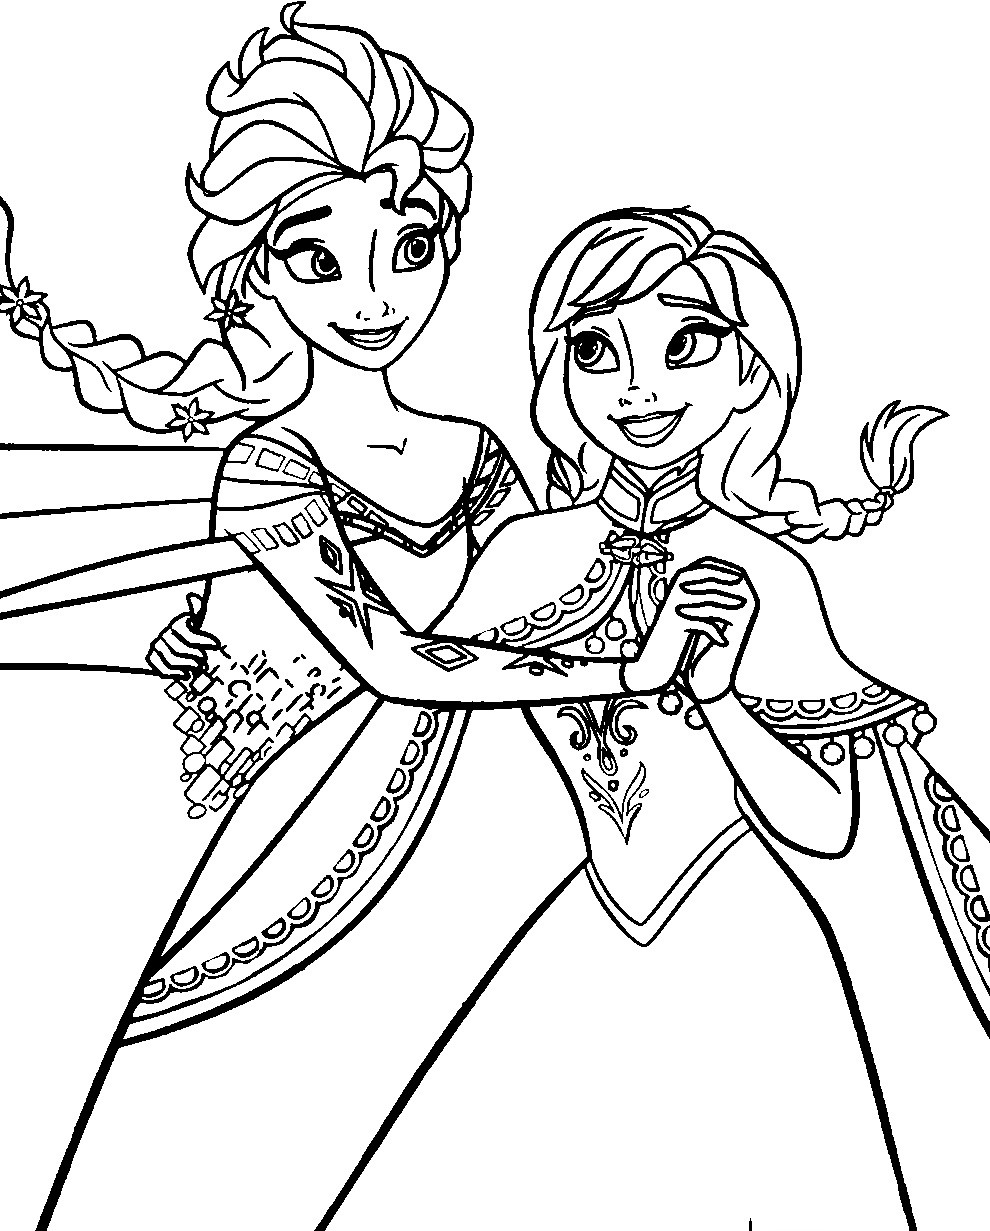 Frozen Coloring Pages For Girls
 Disney Frozen Coloring Pages To Download